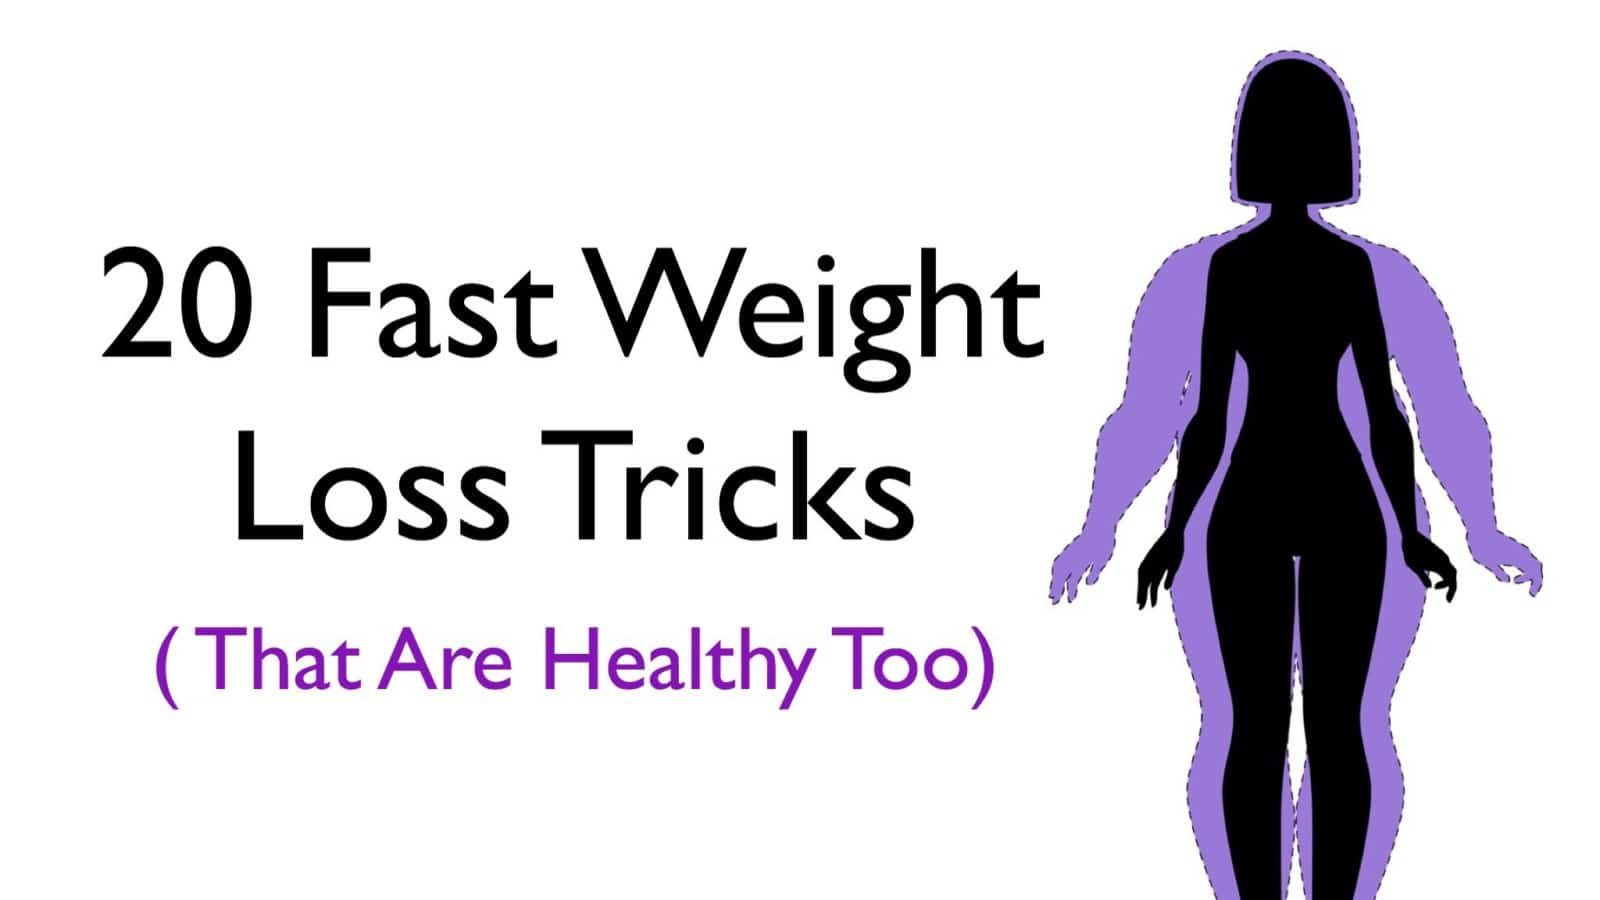 Quick Weight Loss Tricks
 20 Fast Weight Loss Tricks That Are Healthy